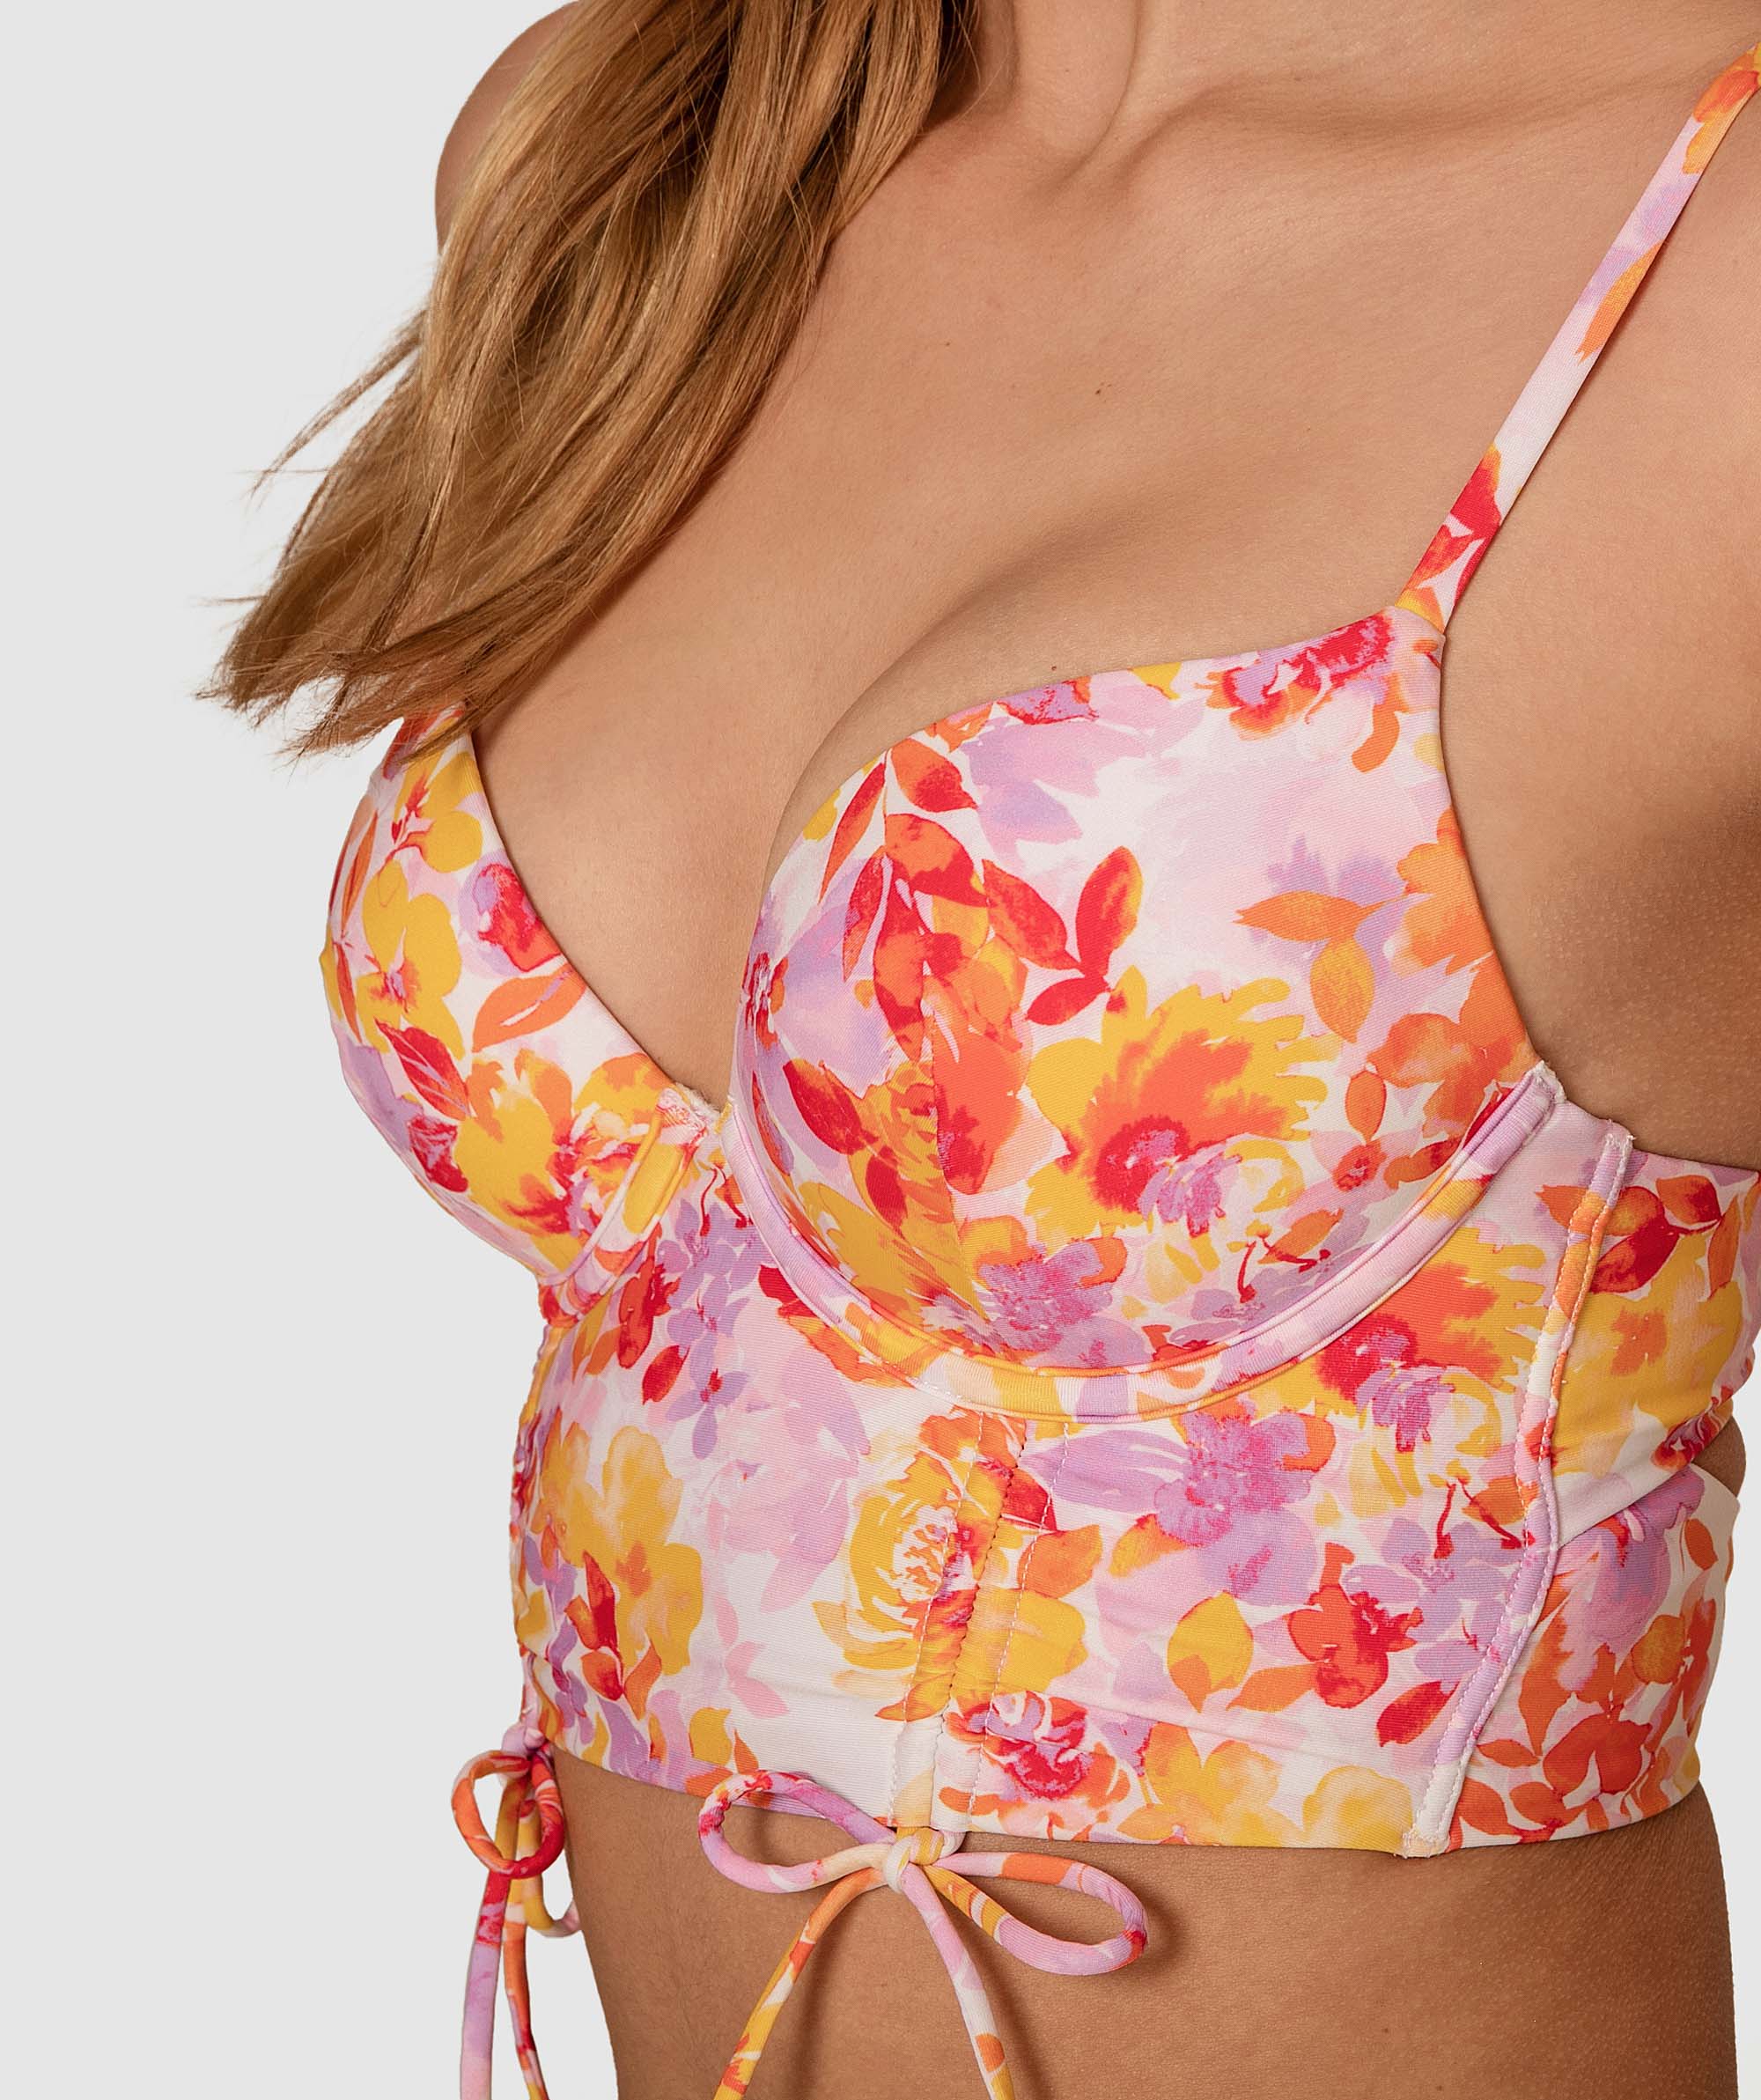 Planet Bliss Swim Vibrant Vacation Push Up Top - Floral Print